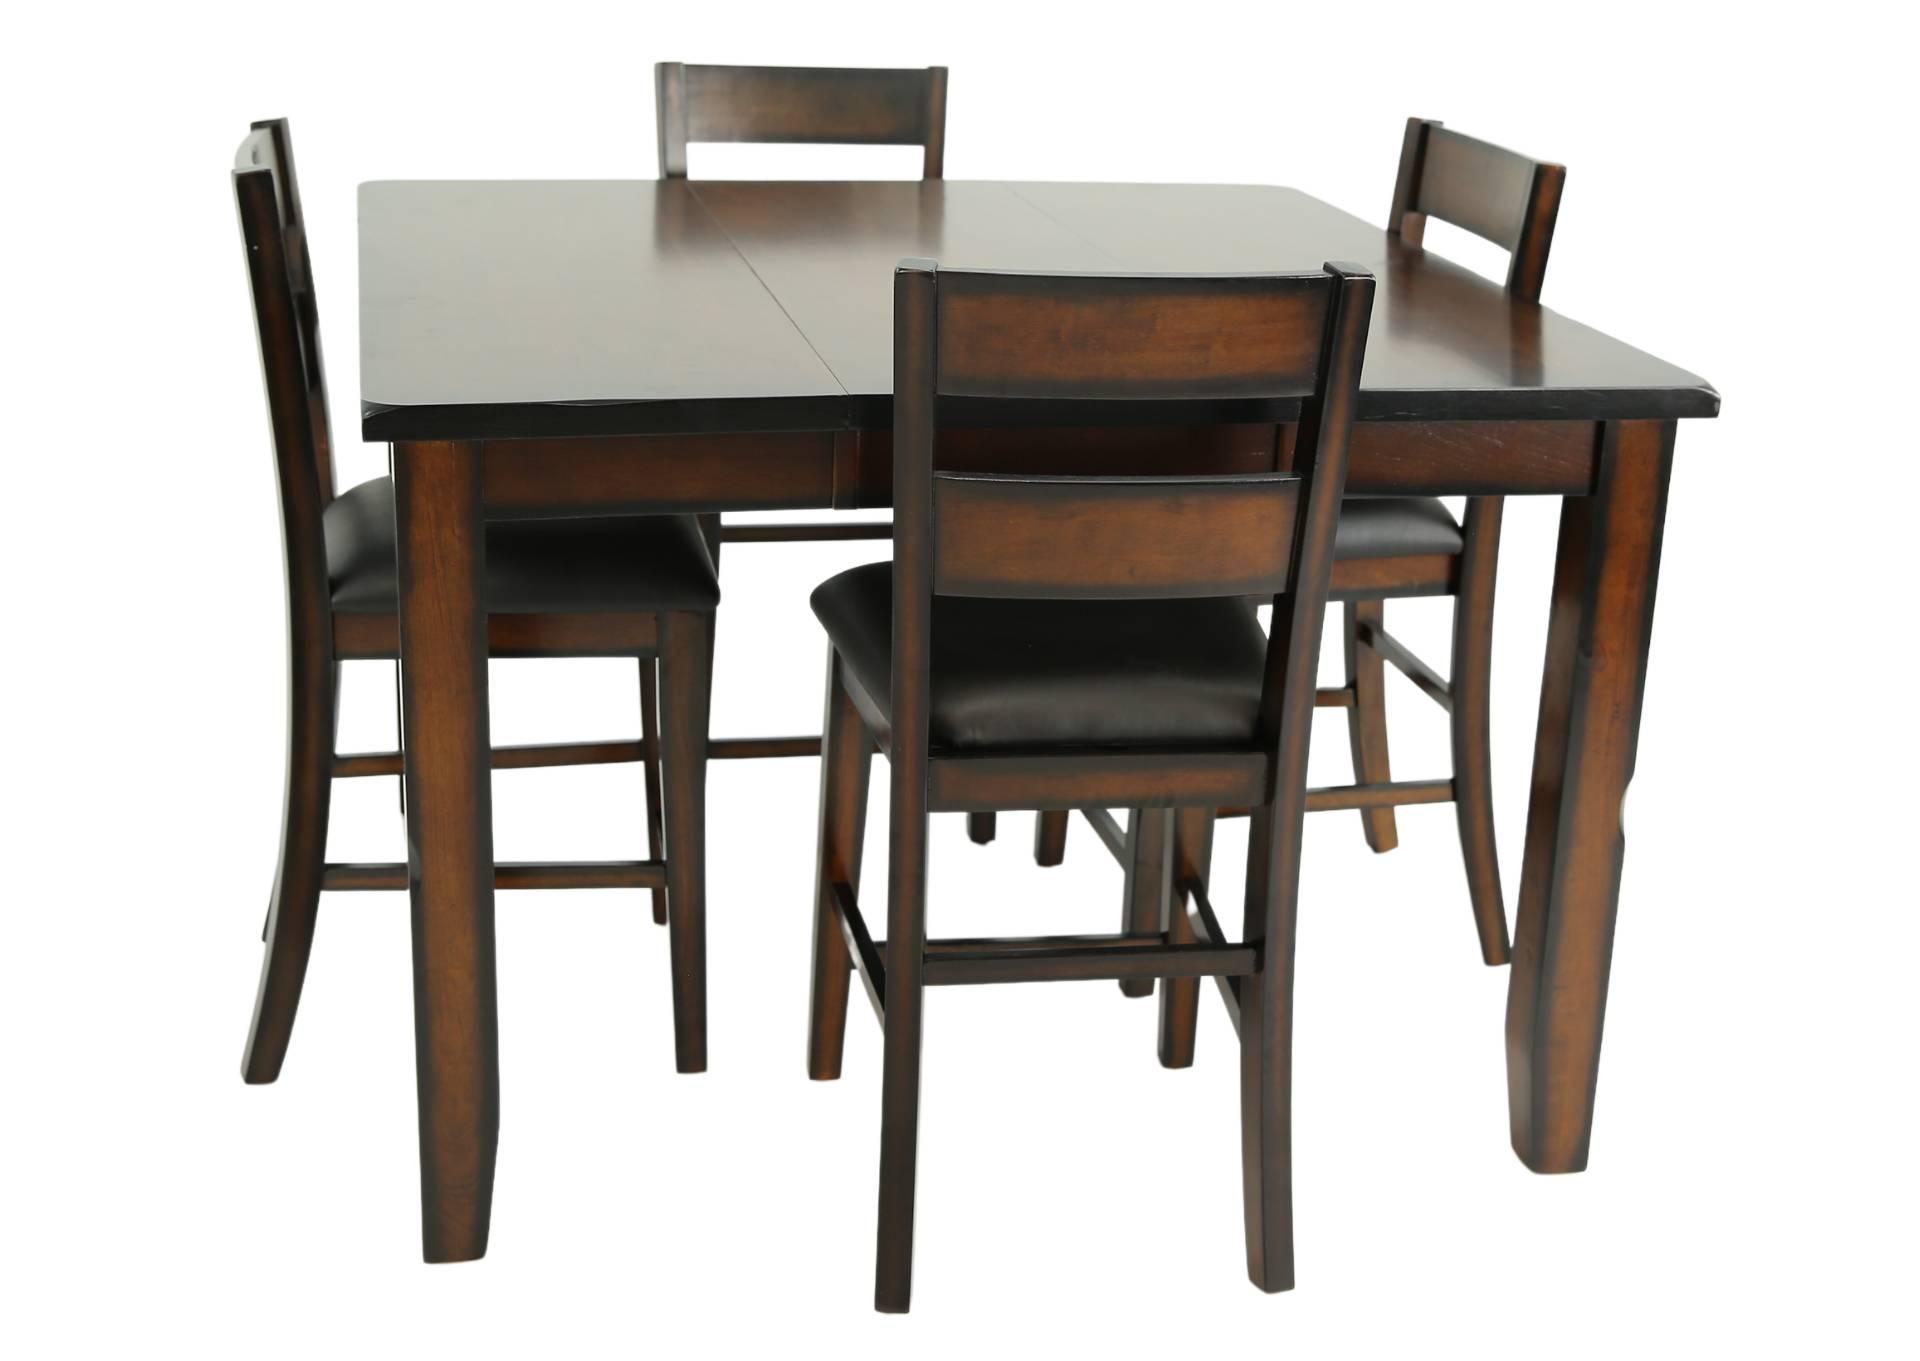 MALDIVES 5 PIECE COUNTER HEIGHT DINING SET